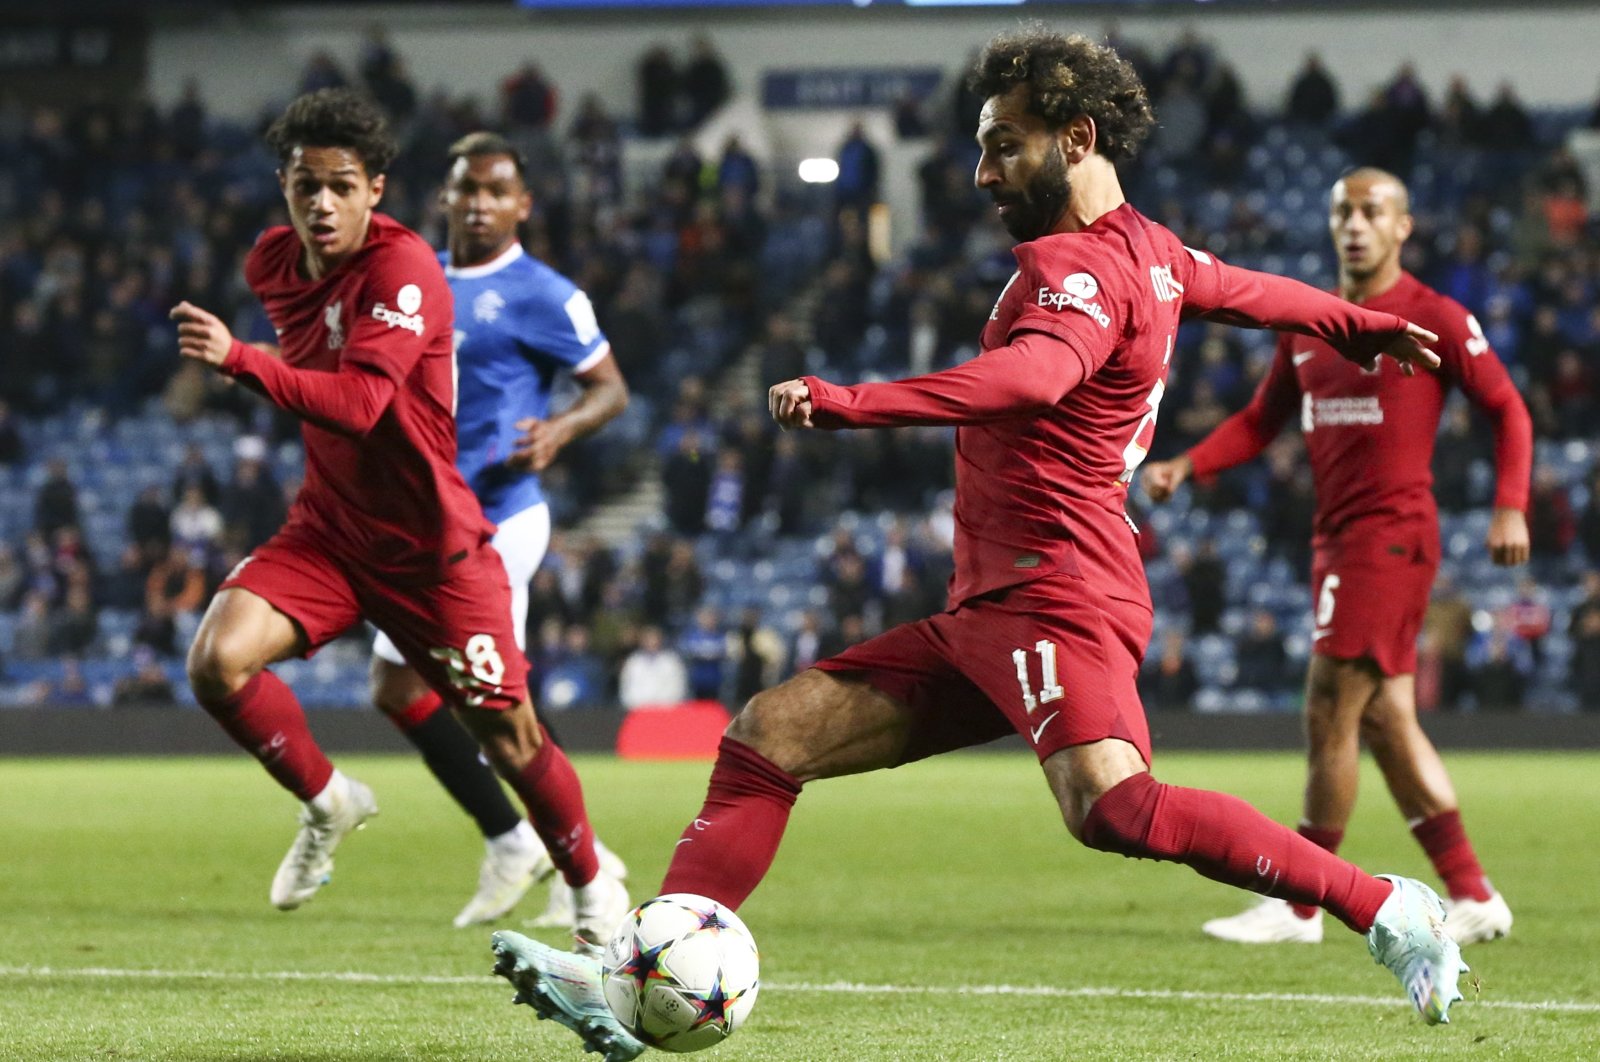 Mohamed Salah (R) of Liverpool in action during the UEFA Champions League group A football match between Rangers FC and Liverpool FC, Glasgow, Britain, Oct. 12, 2022. (EPA Photo)